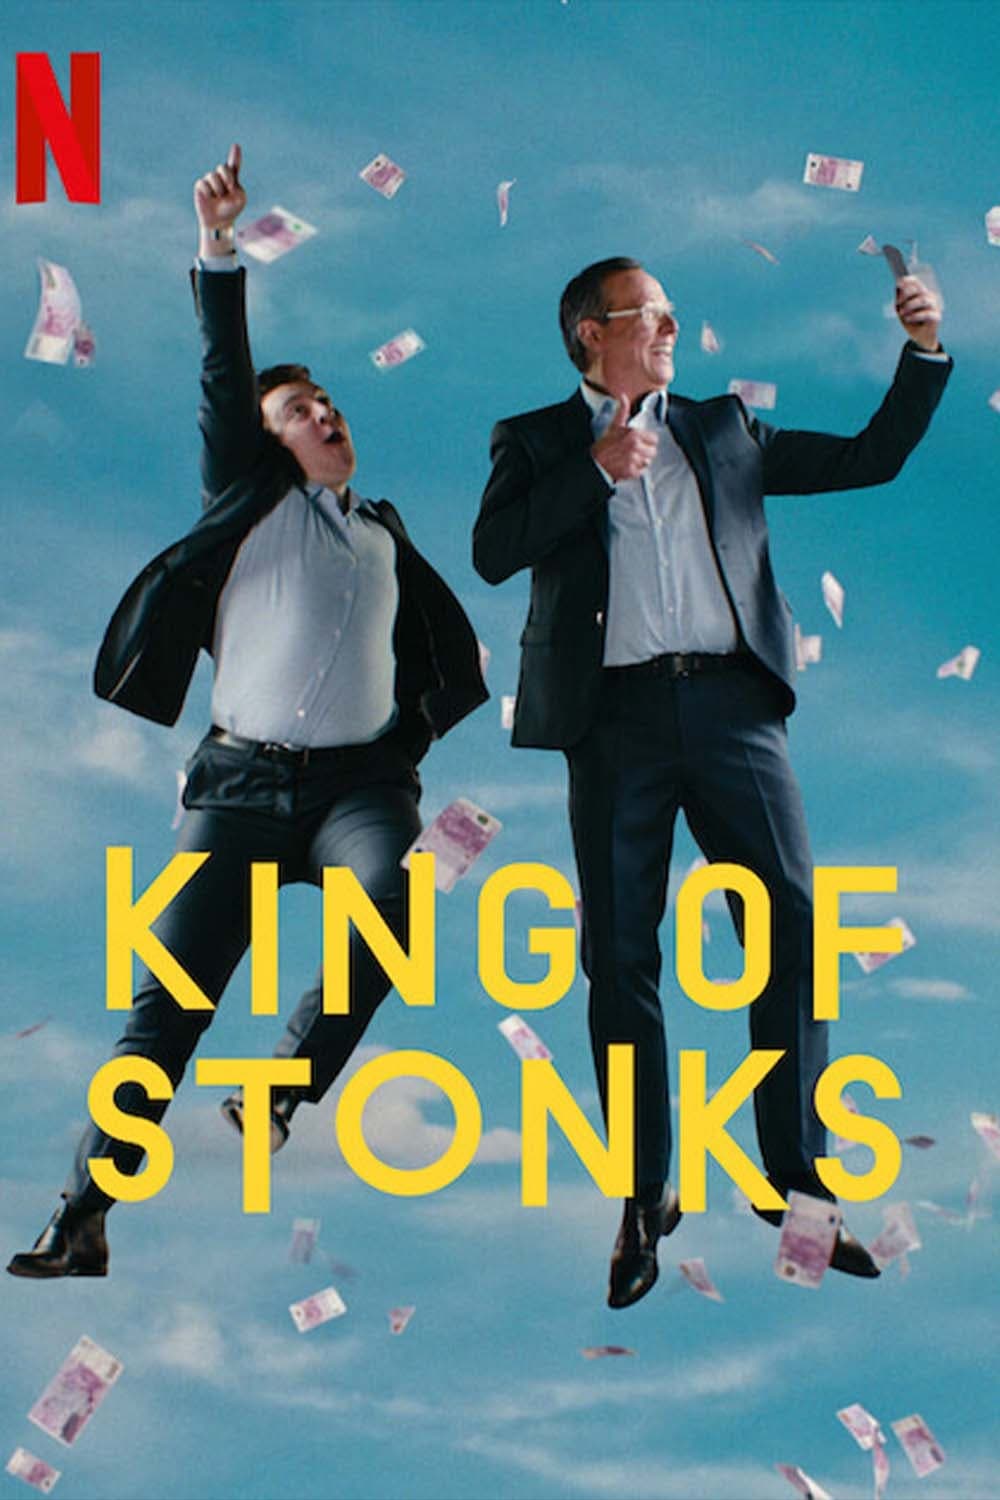 Is King of Stonks (2022) available on Netflix